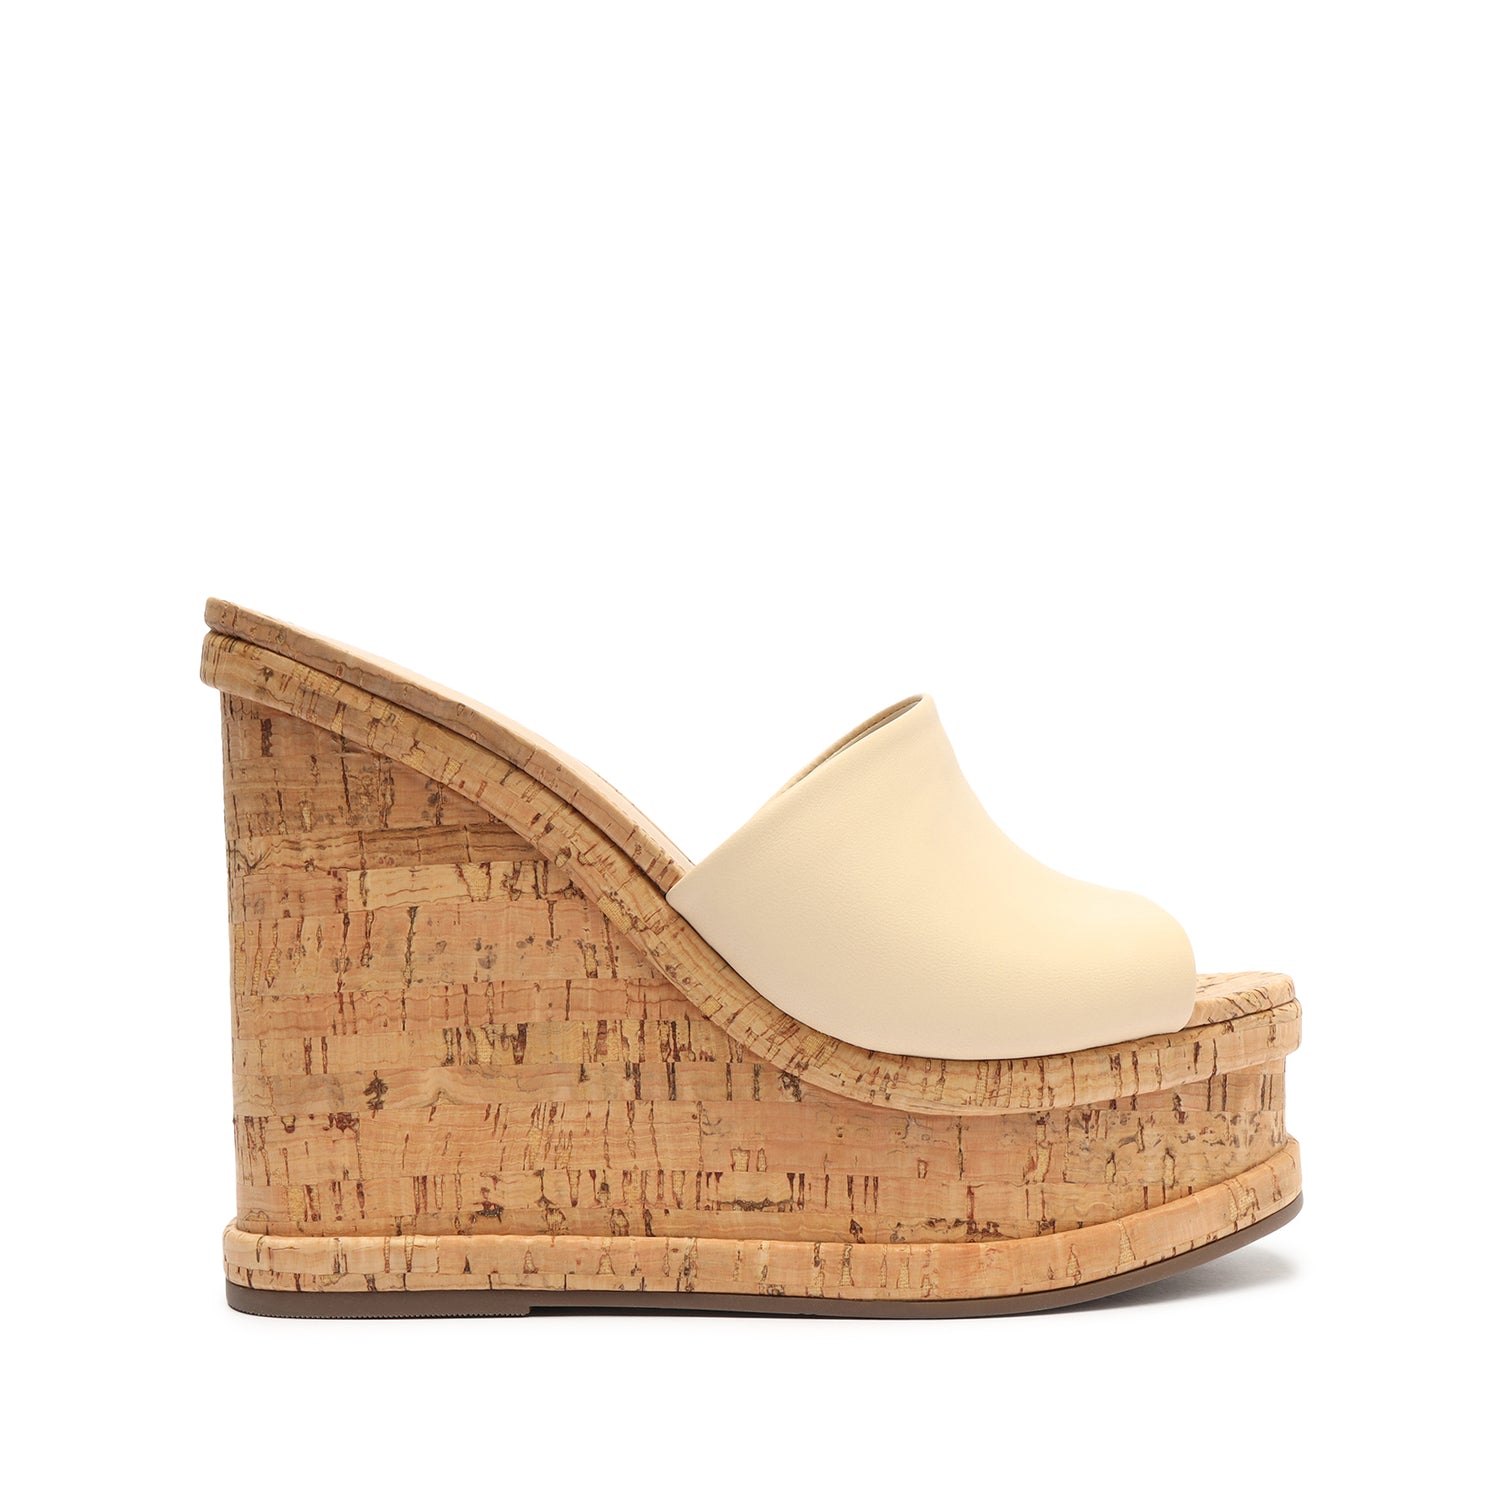 Dalle Nappa Leather Sandal Sandals Sale 5 Eggshell Nappa Leather - Schutz Shoes